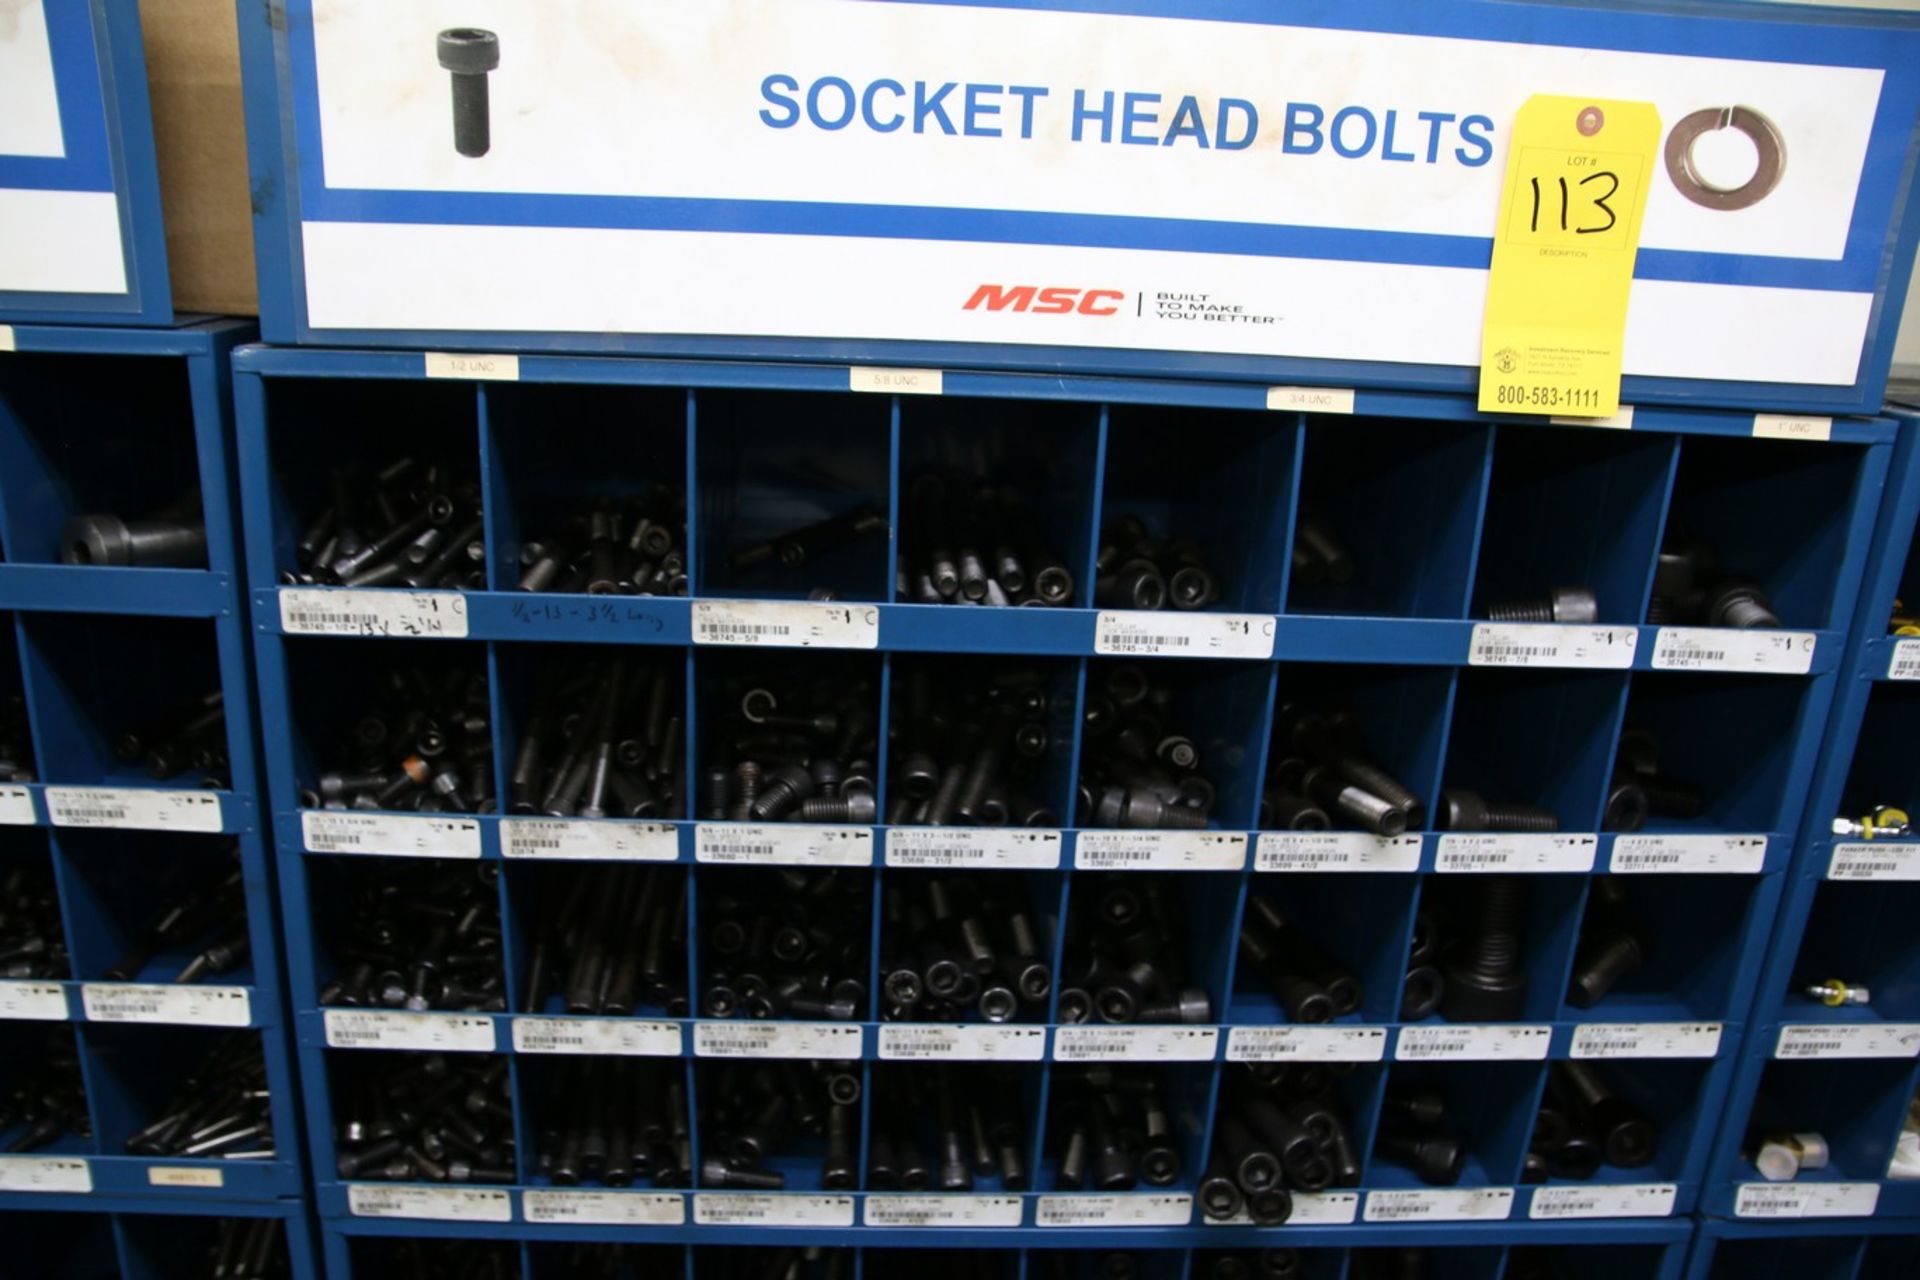 Steel Hardware Bins with Socket Head Bolts - Image 2 of 4